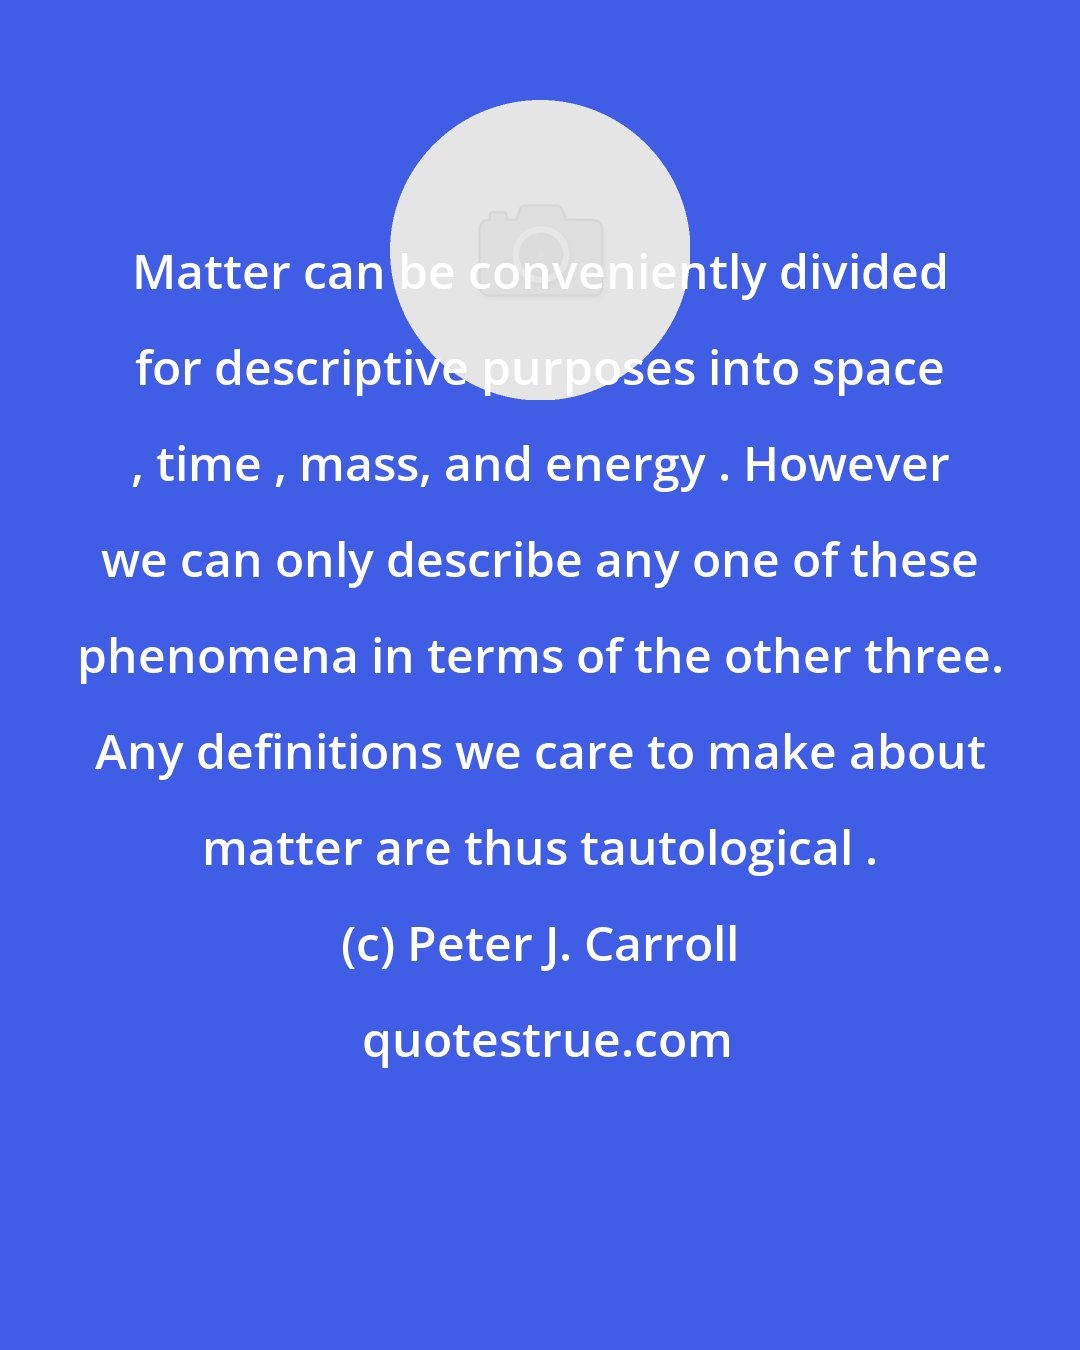 Peter J. Carroll: Matter can be conveniently divided for descriptive purposes into space , time , mass, and energy . However we can only describe any one of these phenomena in terms of the other three. Any definitions we care to make about matter are thus tautological .